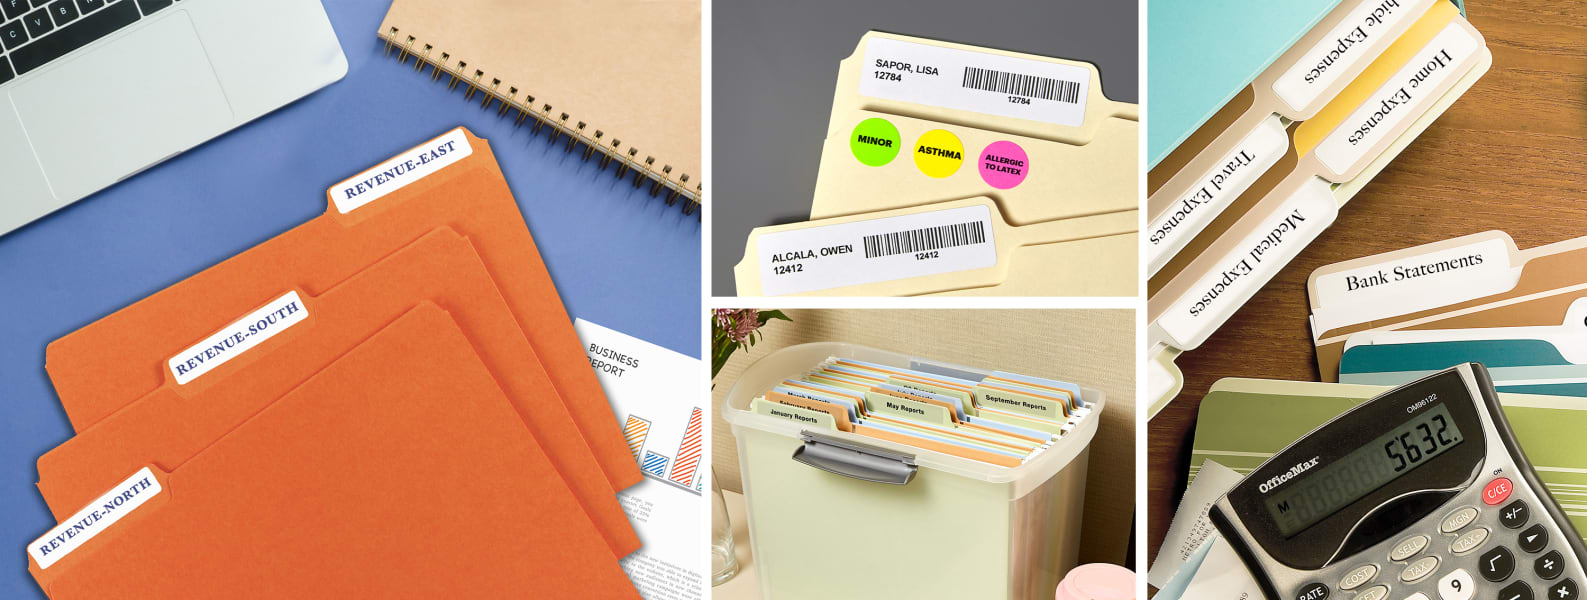 How To Make Your Own File Folder Labels Avery